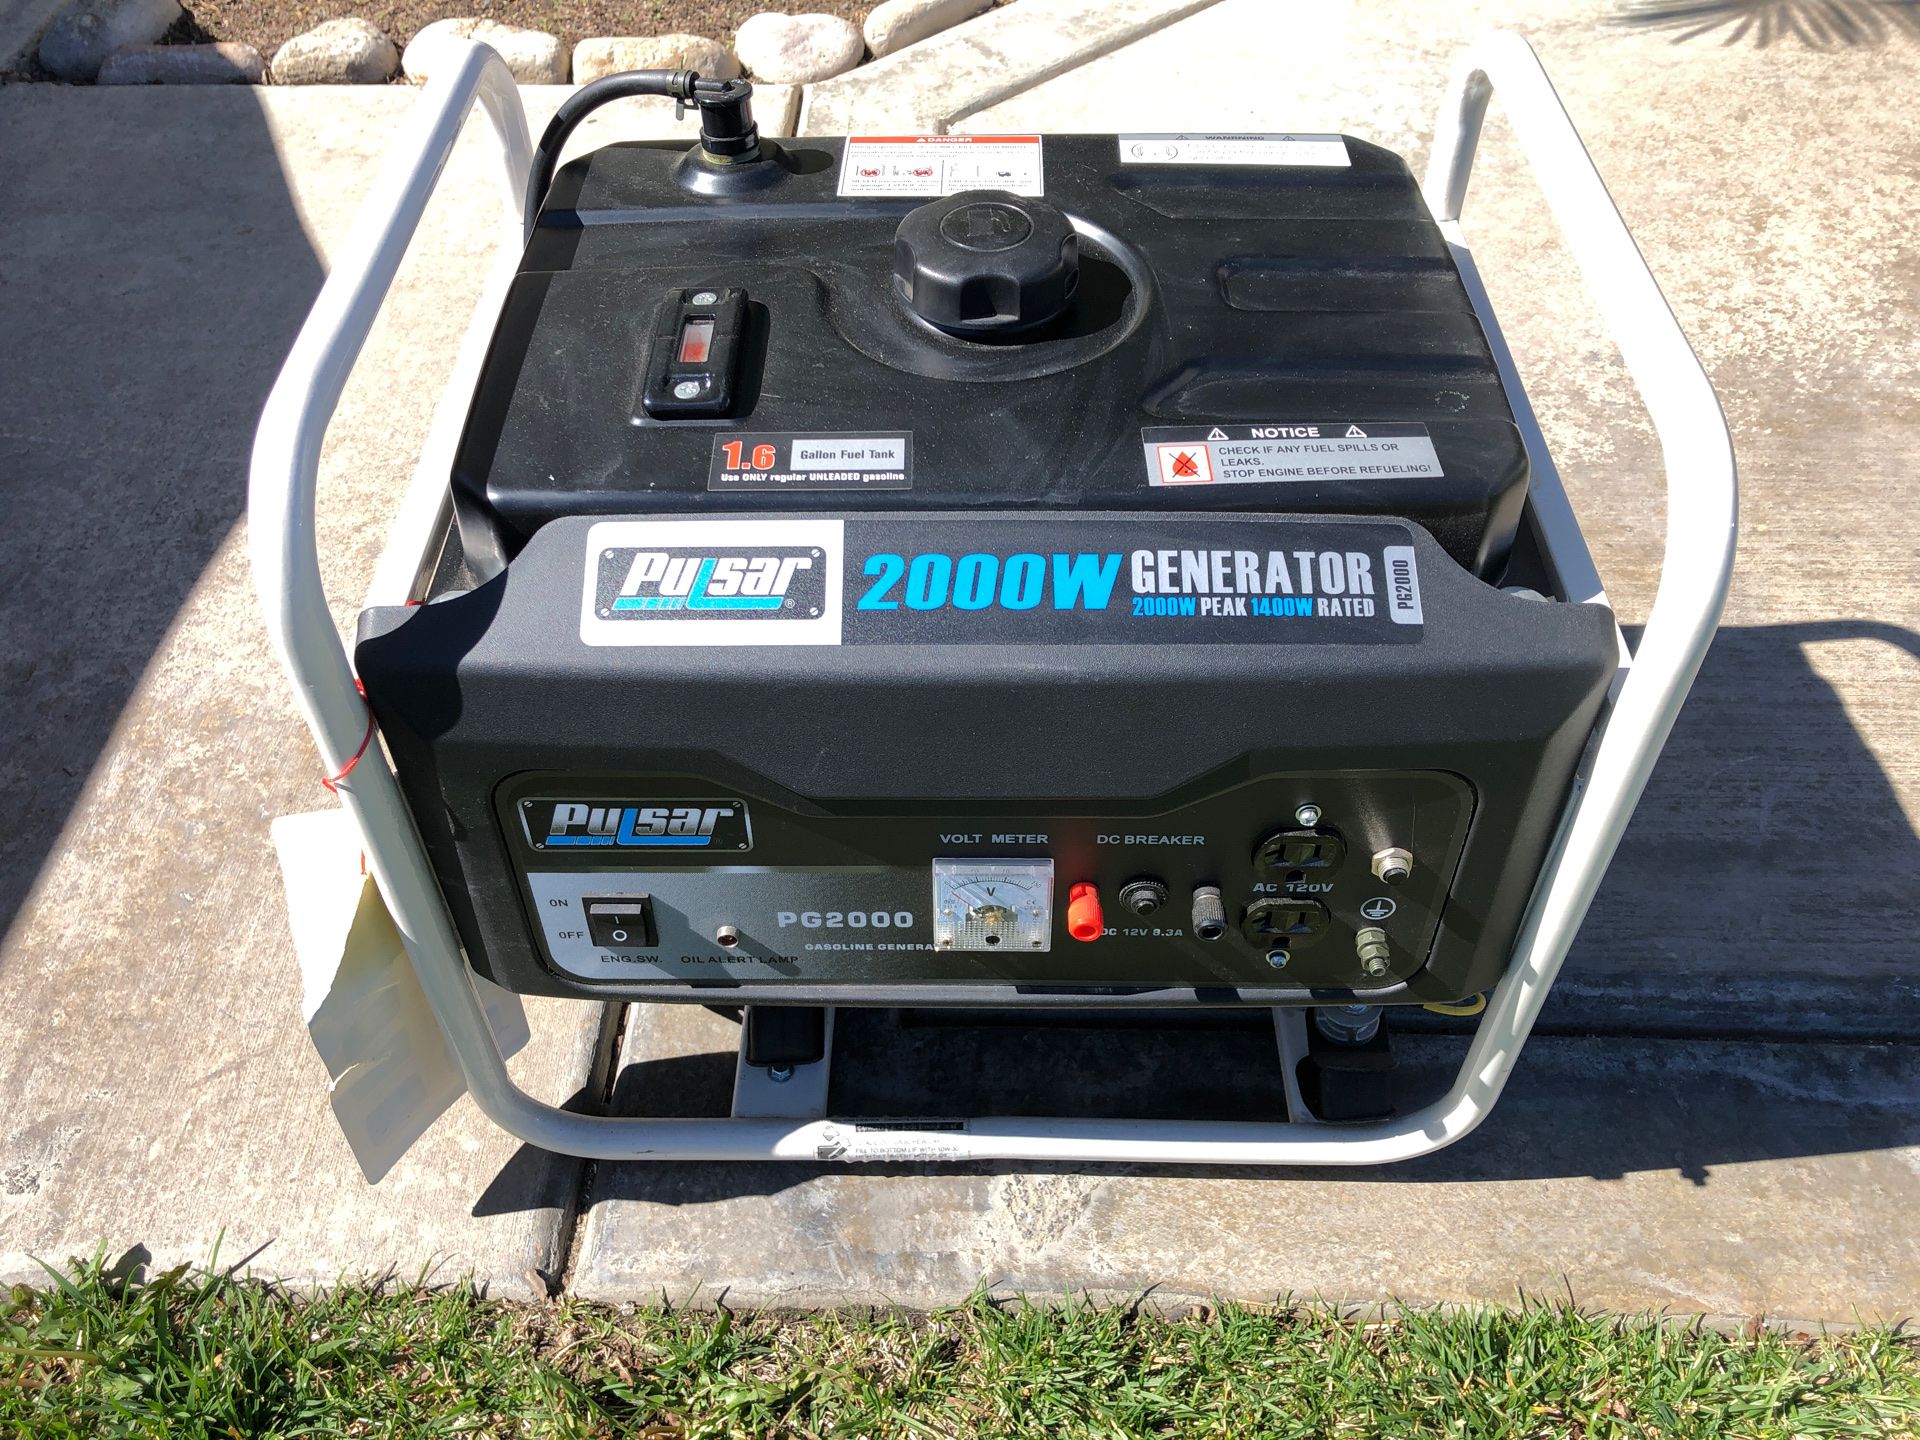 New Generator - 2000W used only Two times